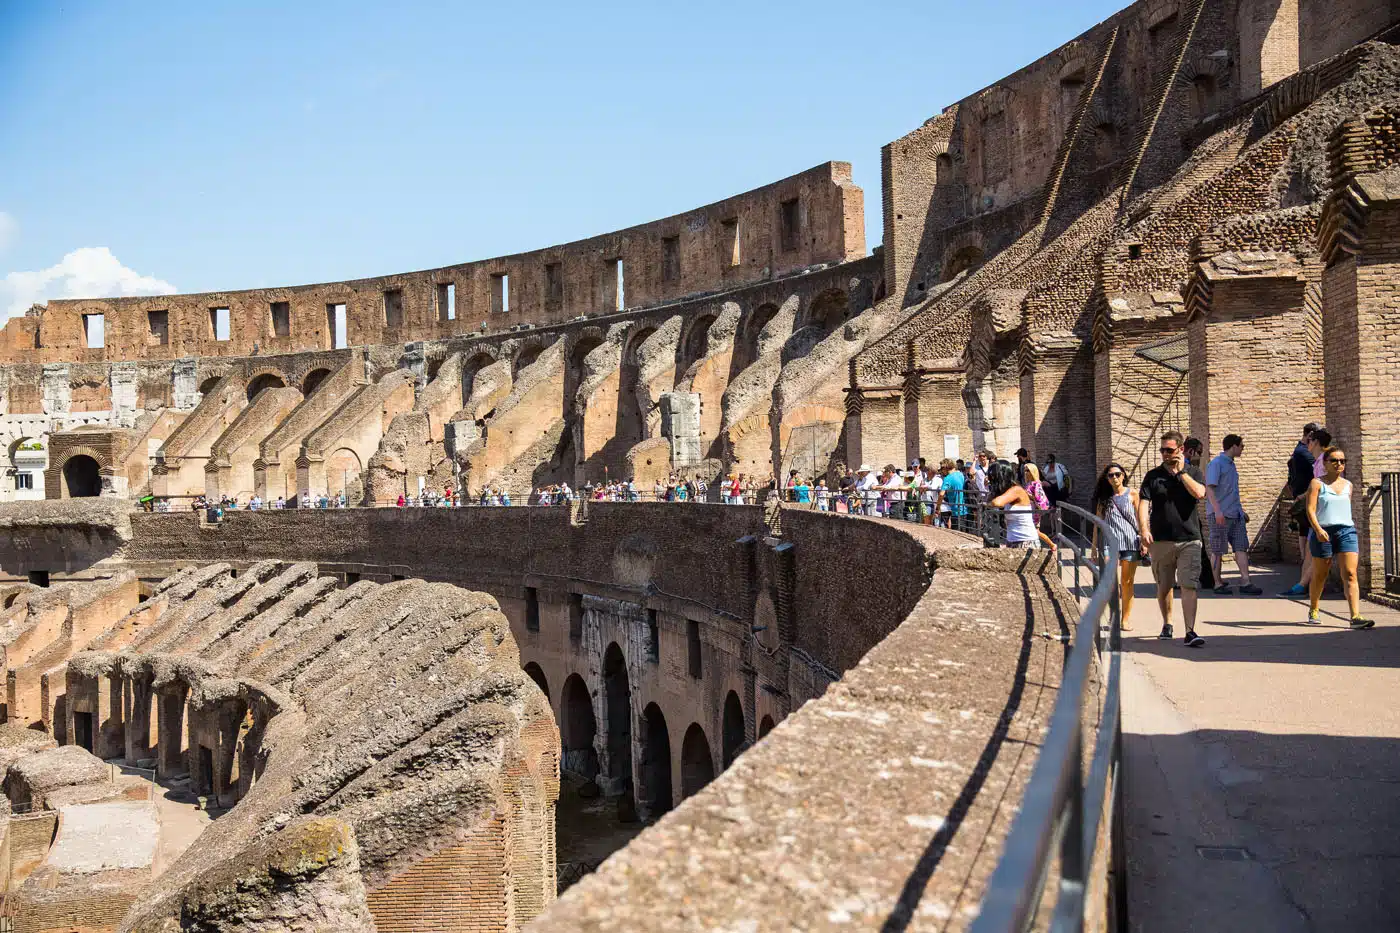 Colosseum Second Level | How to Visit the Colosseum